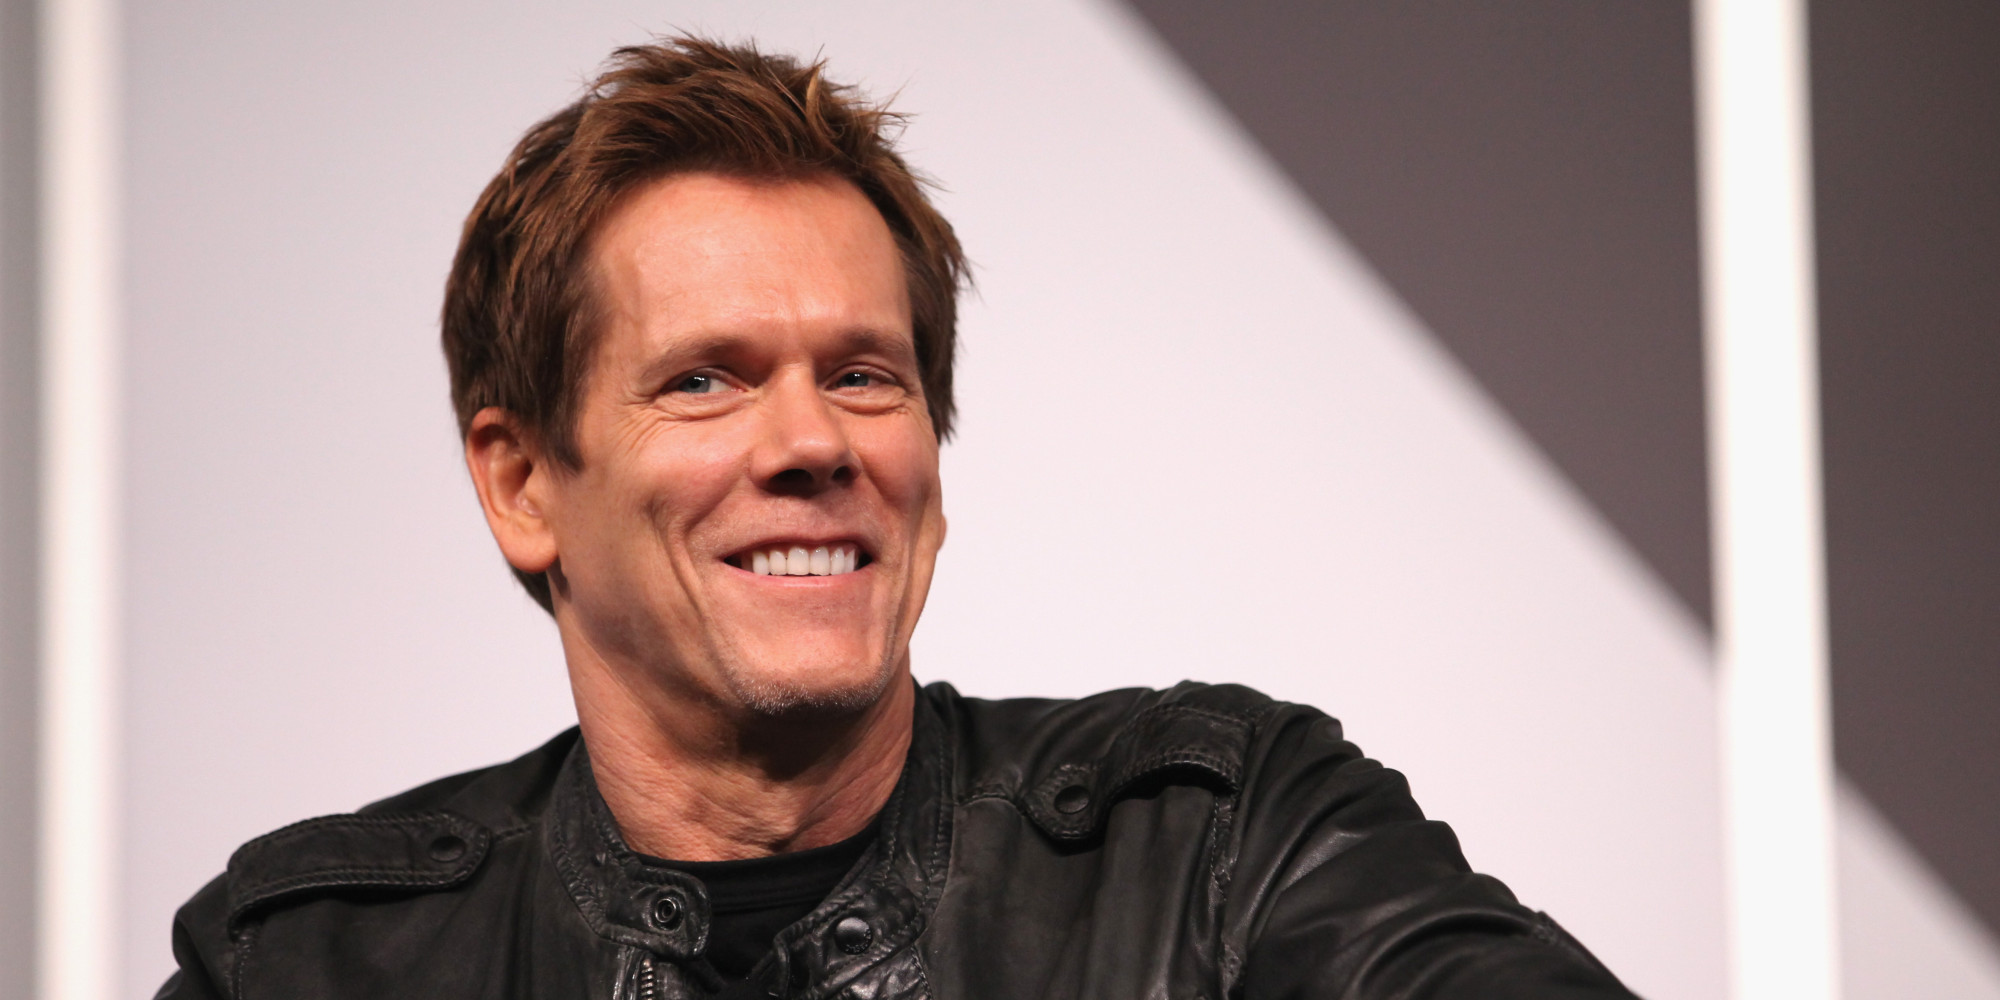 Amazing Kevin Bacon Pictures & Backgrounds